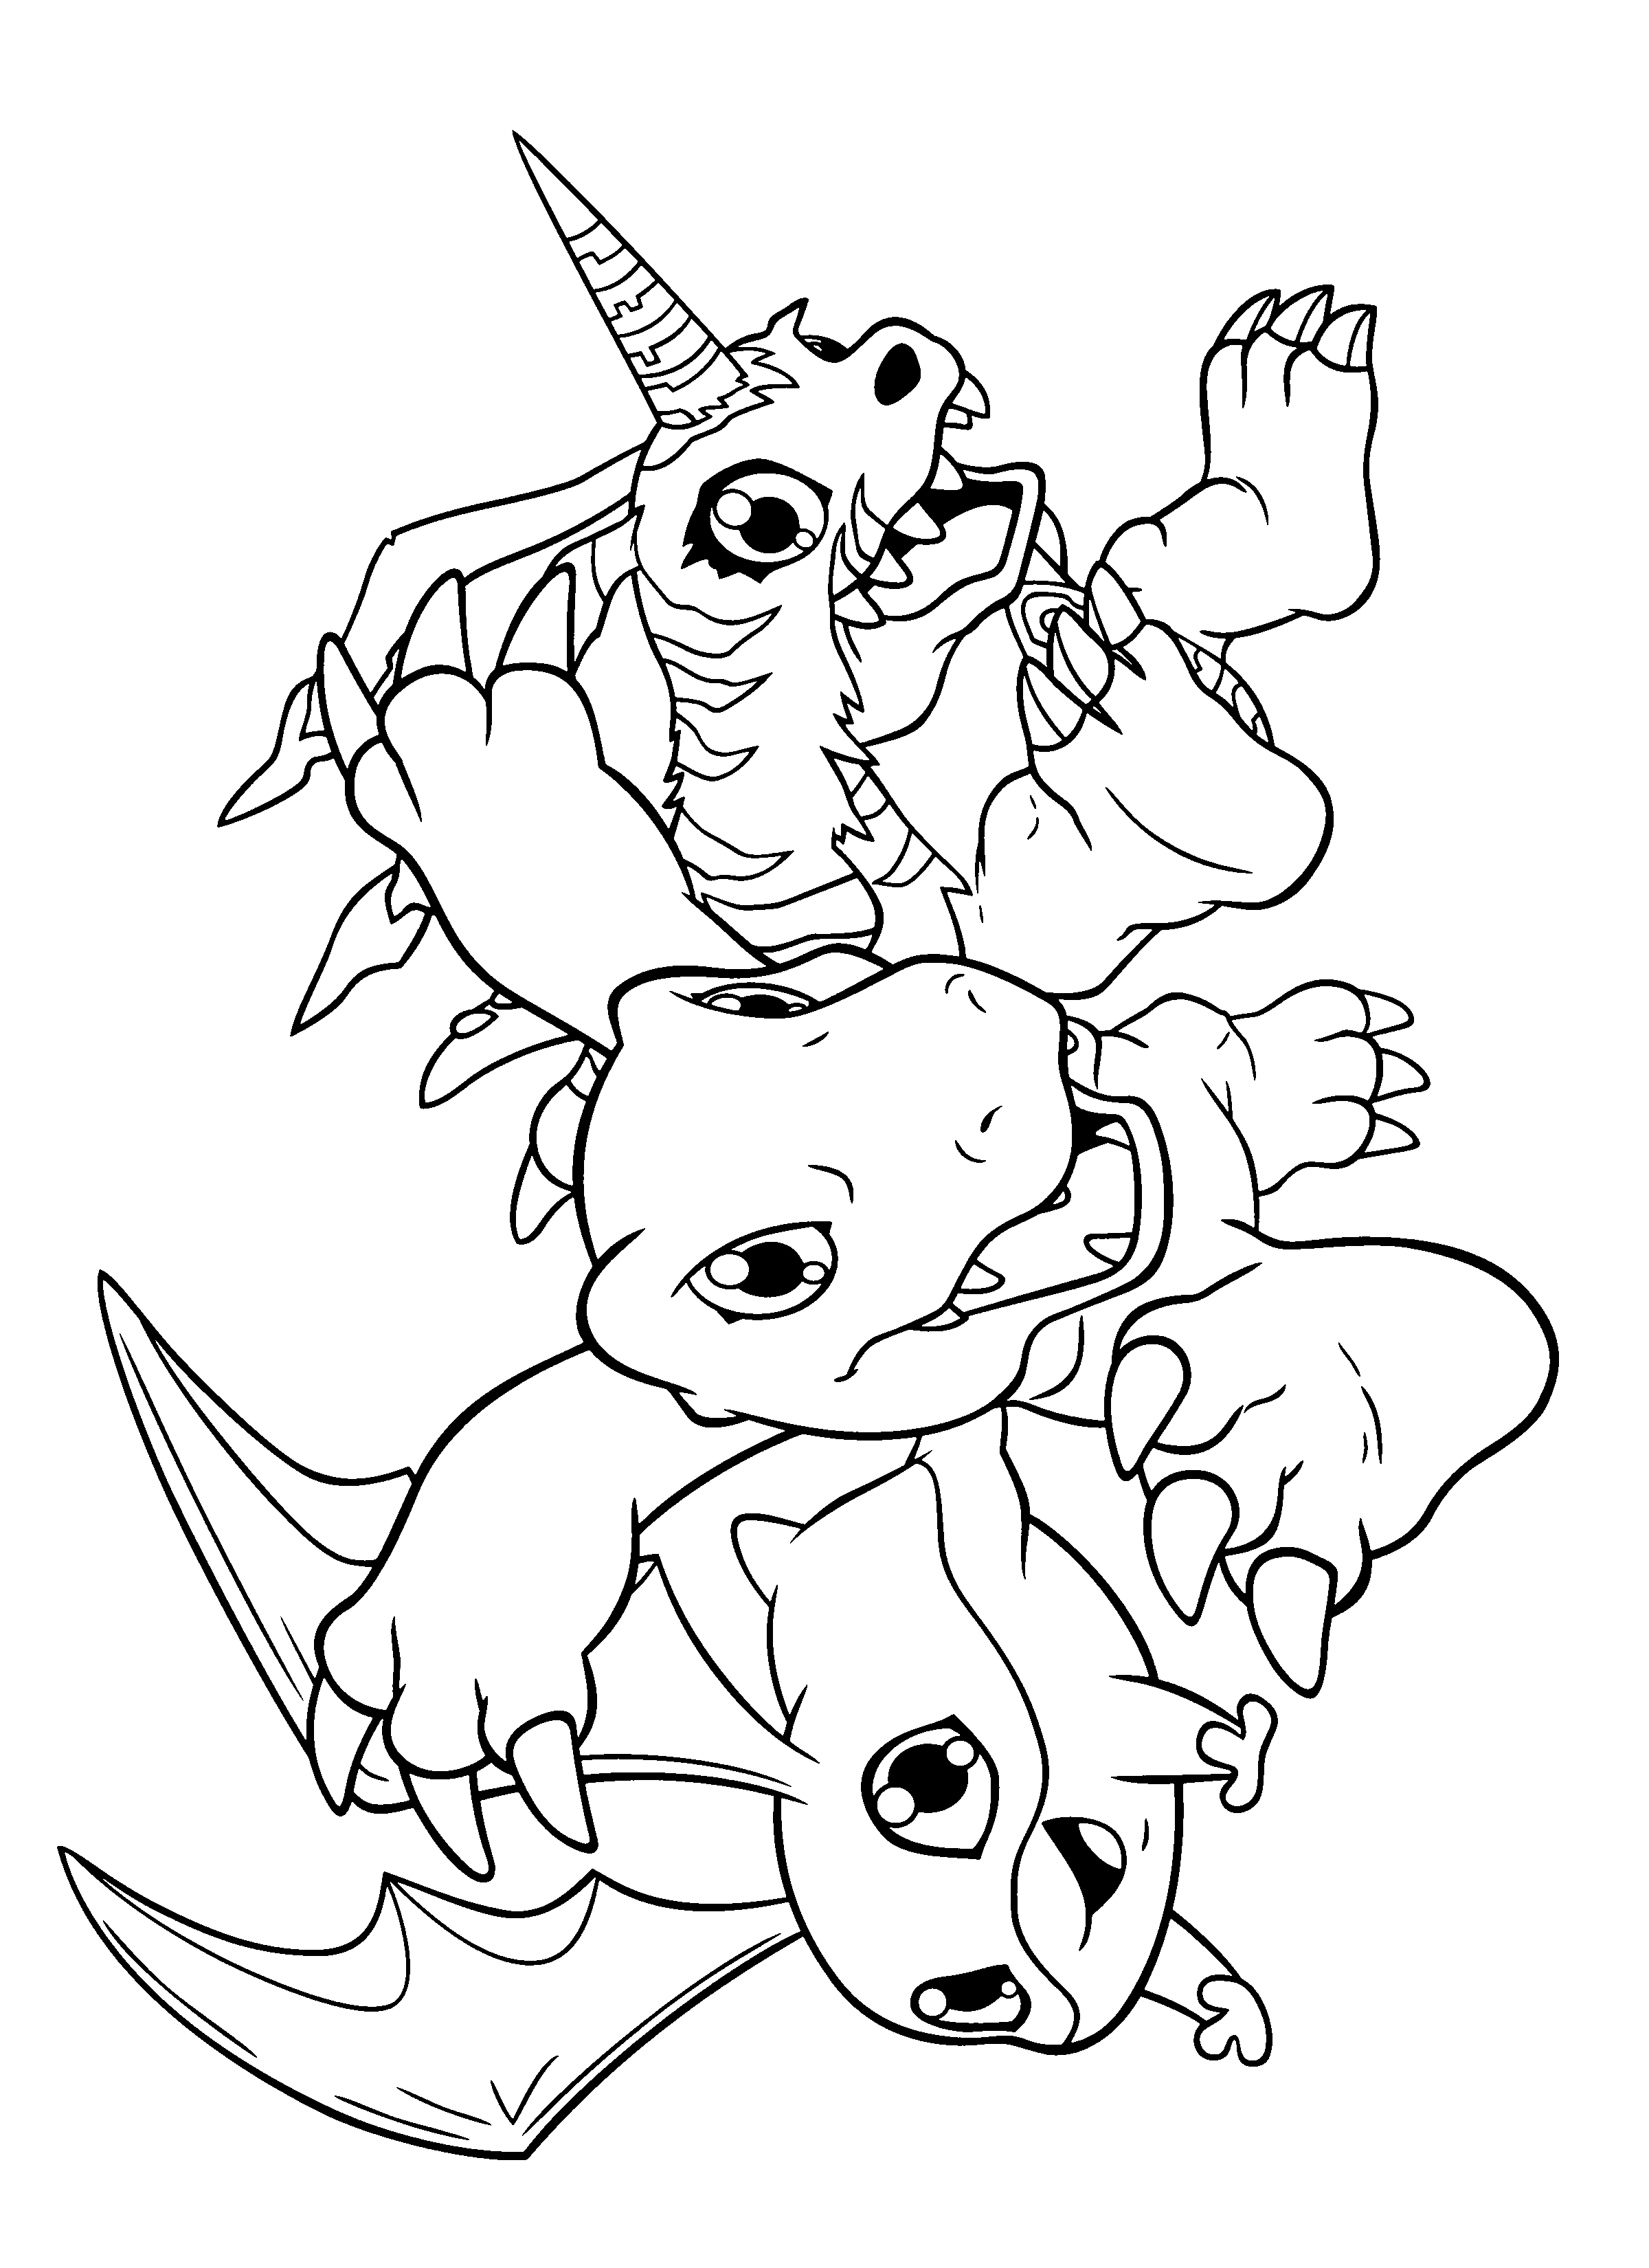 Coloring Page Digimon coloring pages 210